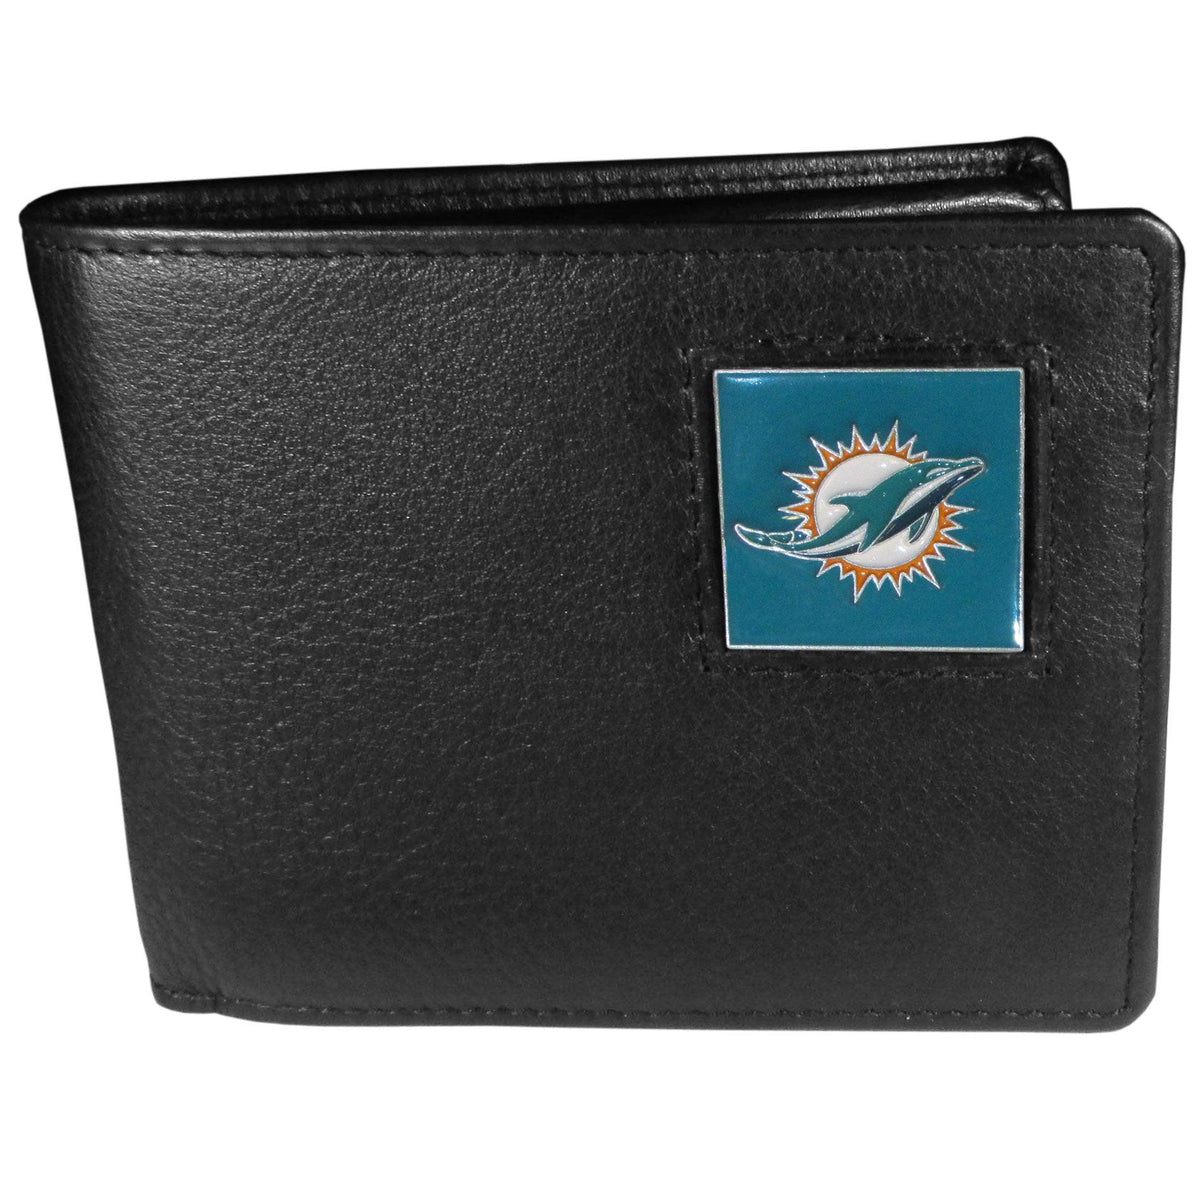 Miami Dolphins Leather Bi-fold Wallet Packaged in Gift Box - Flyclothing LLC